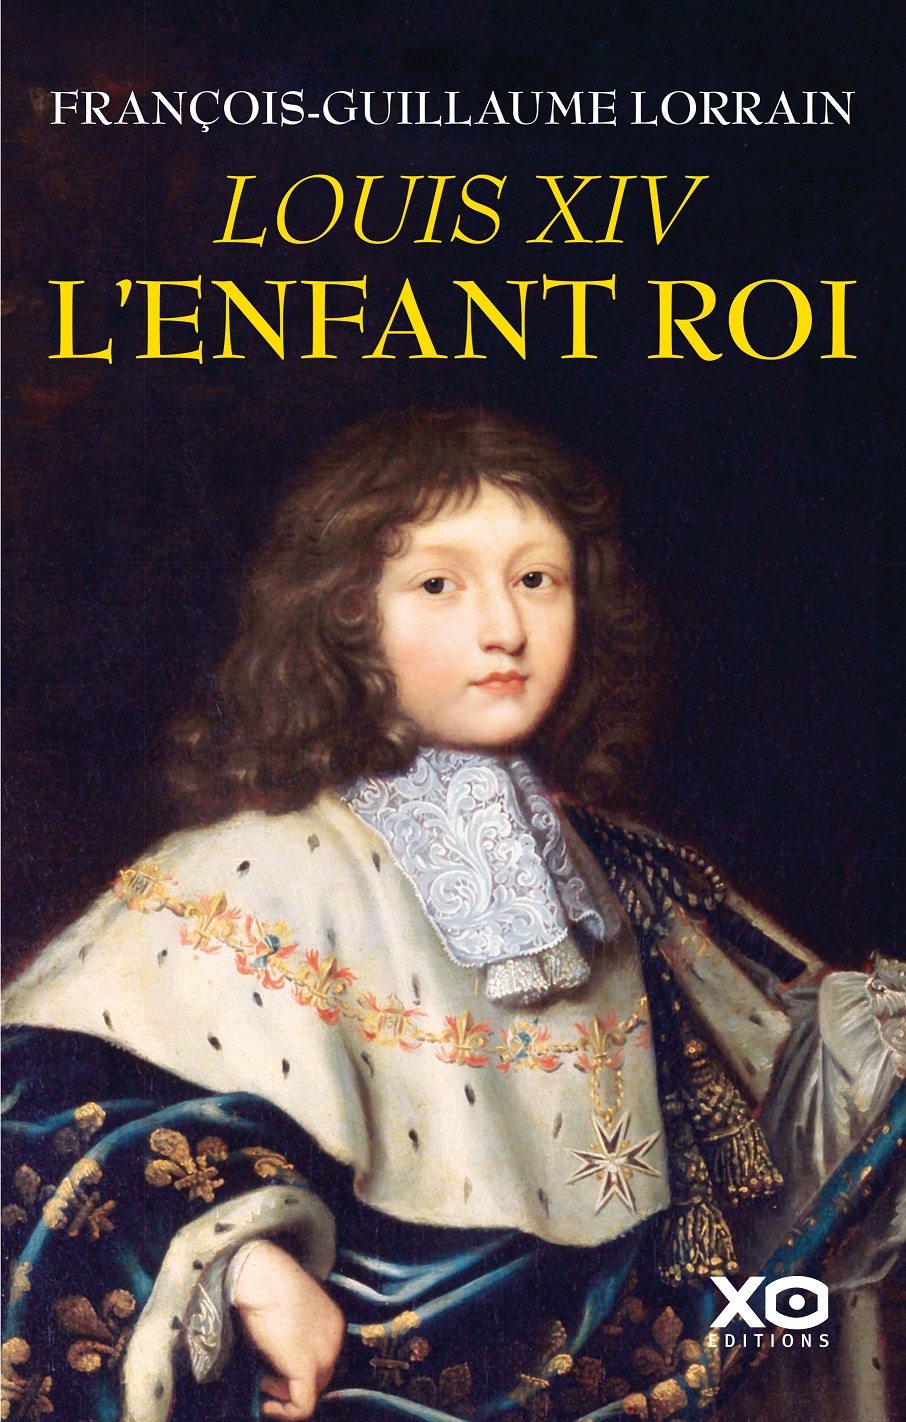 King of the World: The Life of Louis XIV